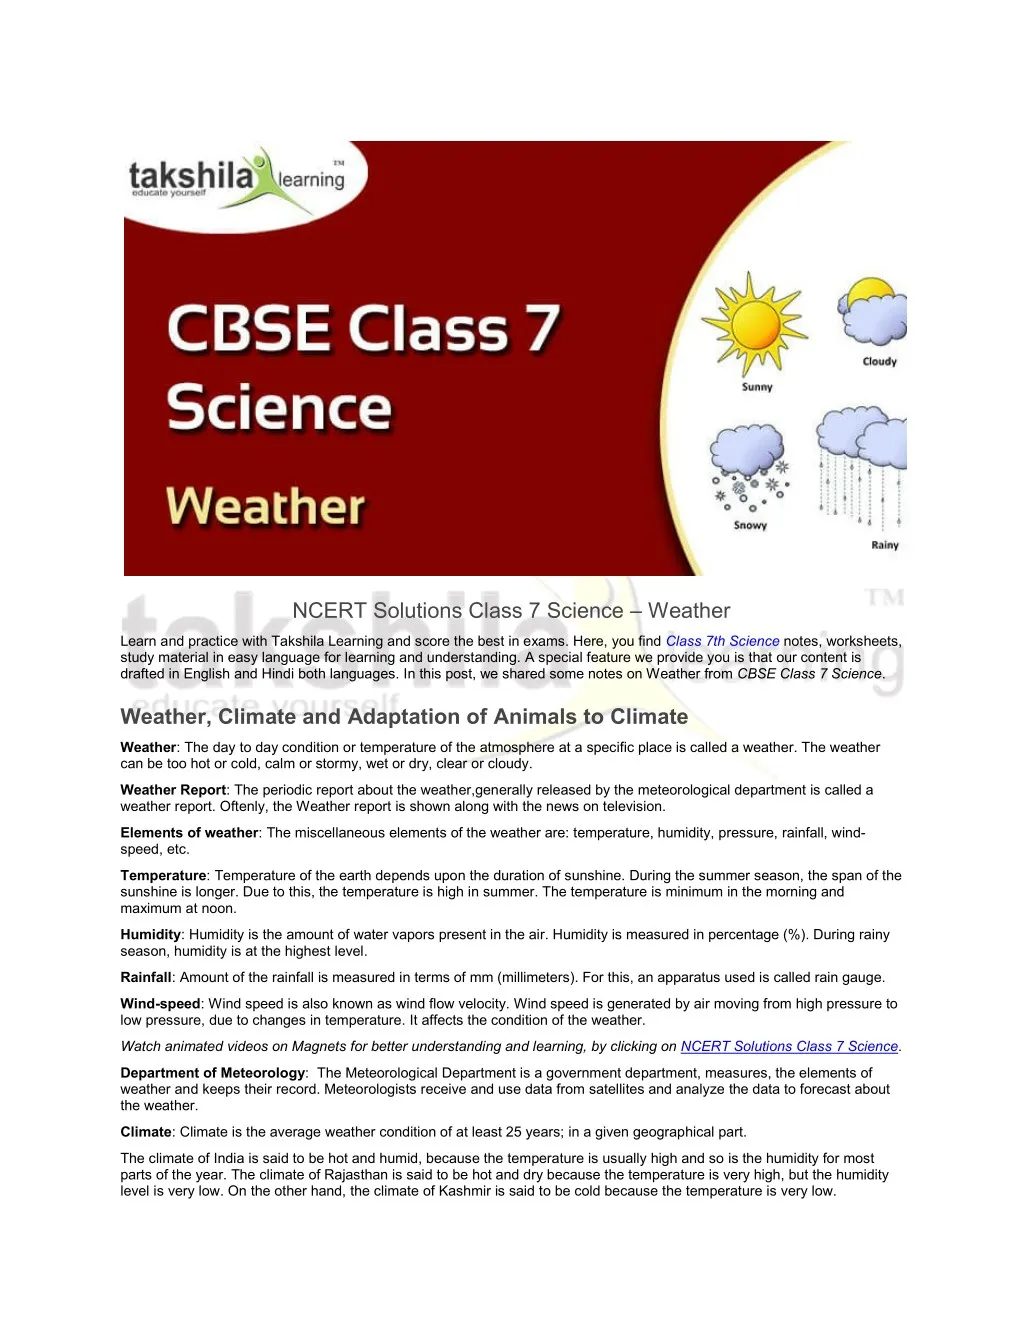 ncert solutions class 7 science weather